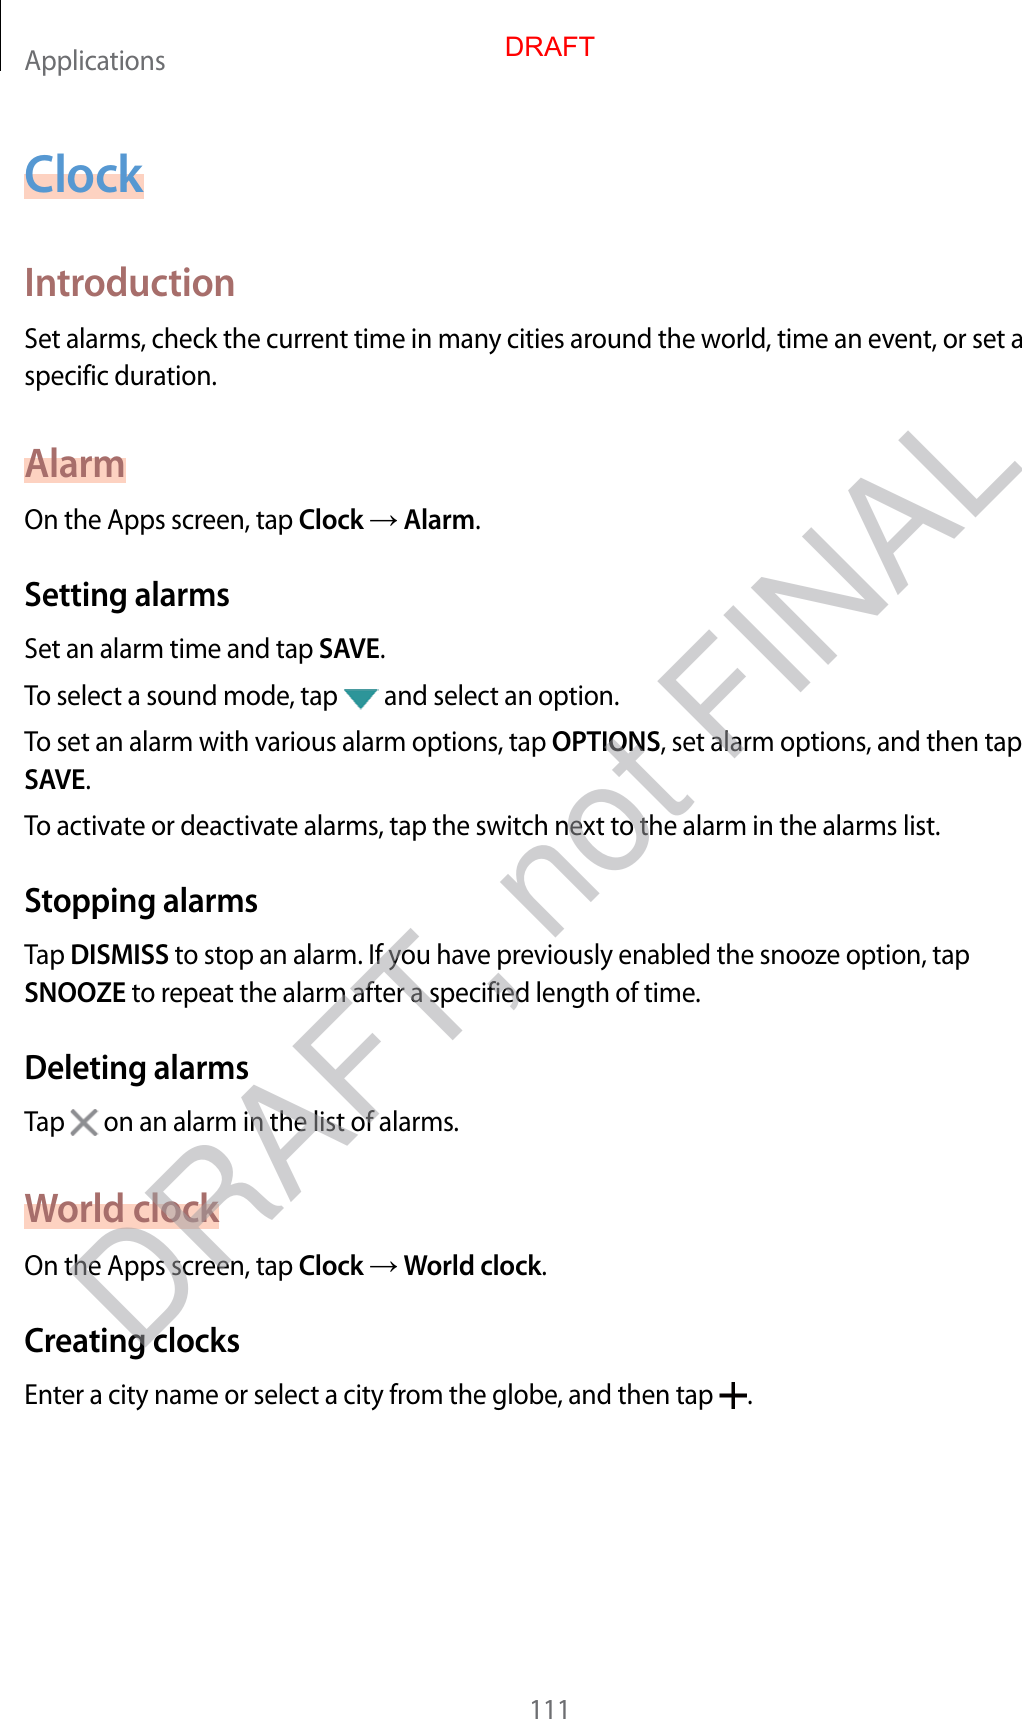 Applications111ClockIntroductionSet alarms, check the current time in many cities around the world, time an event, or set a specific duration.AlarmOn the Apps screen, tap Clock  Alarm.Setting alarmsSet an alarm time and tap SAVE.To select a sound mode, tap   and select an option.To set an alarm with various alarm options, tap OPTIONS, set alarm options, and then tap SAVE.To activate or deactivate alarms, tap the switch next to the alarm in the alarms list.Stopping alarmsTap DISMISS to stop an alarm. If you have previously enabled the snooze option, tap SNOOZE to repeat the alarm after a specified length of time.Deleting alarmsTap   on an alarm in the list of alarms.World clockOn the Apps screen, tap Clock  World clock.Creating clocksEnter a city name or select a city from the globe, and then tap  .DRAFTDRAFT, not FINAL